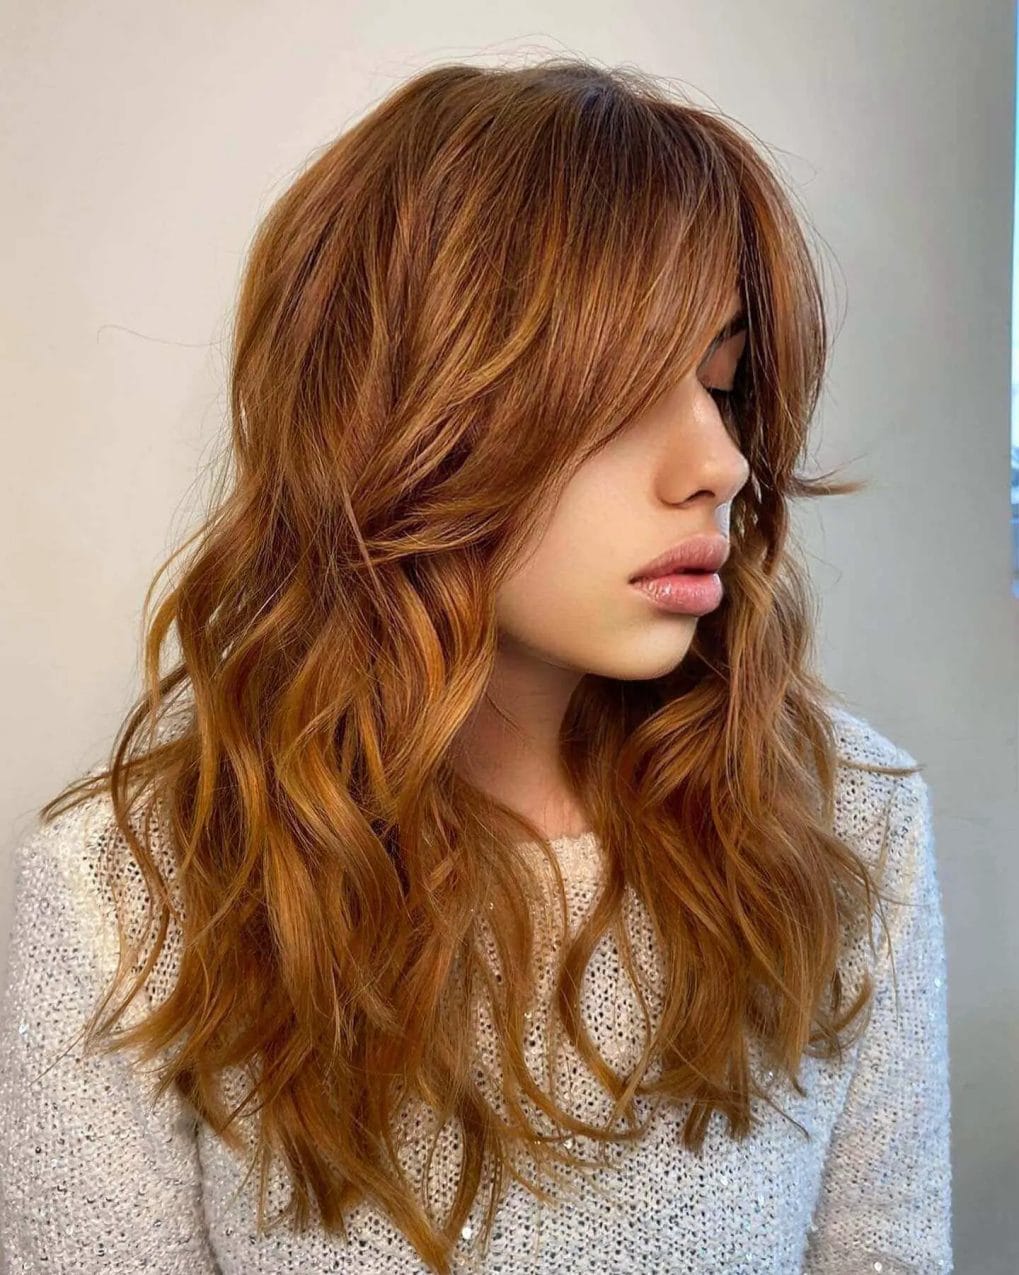 Layered copper waves with long, draping textured bangs